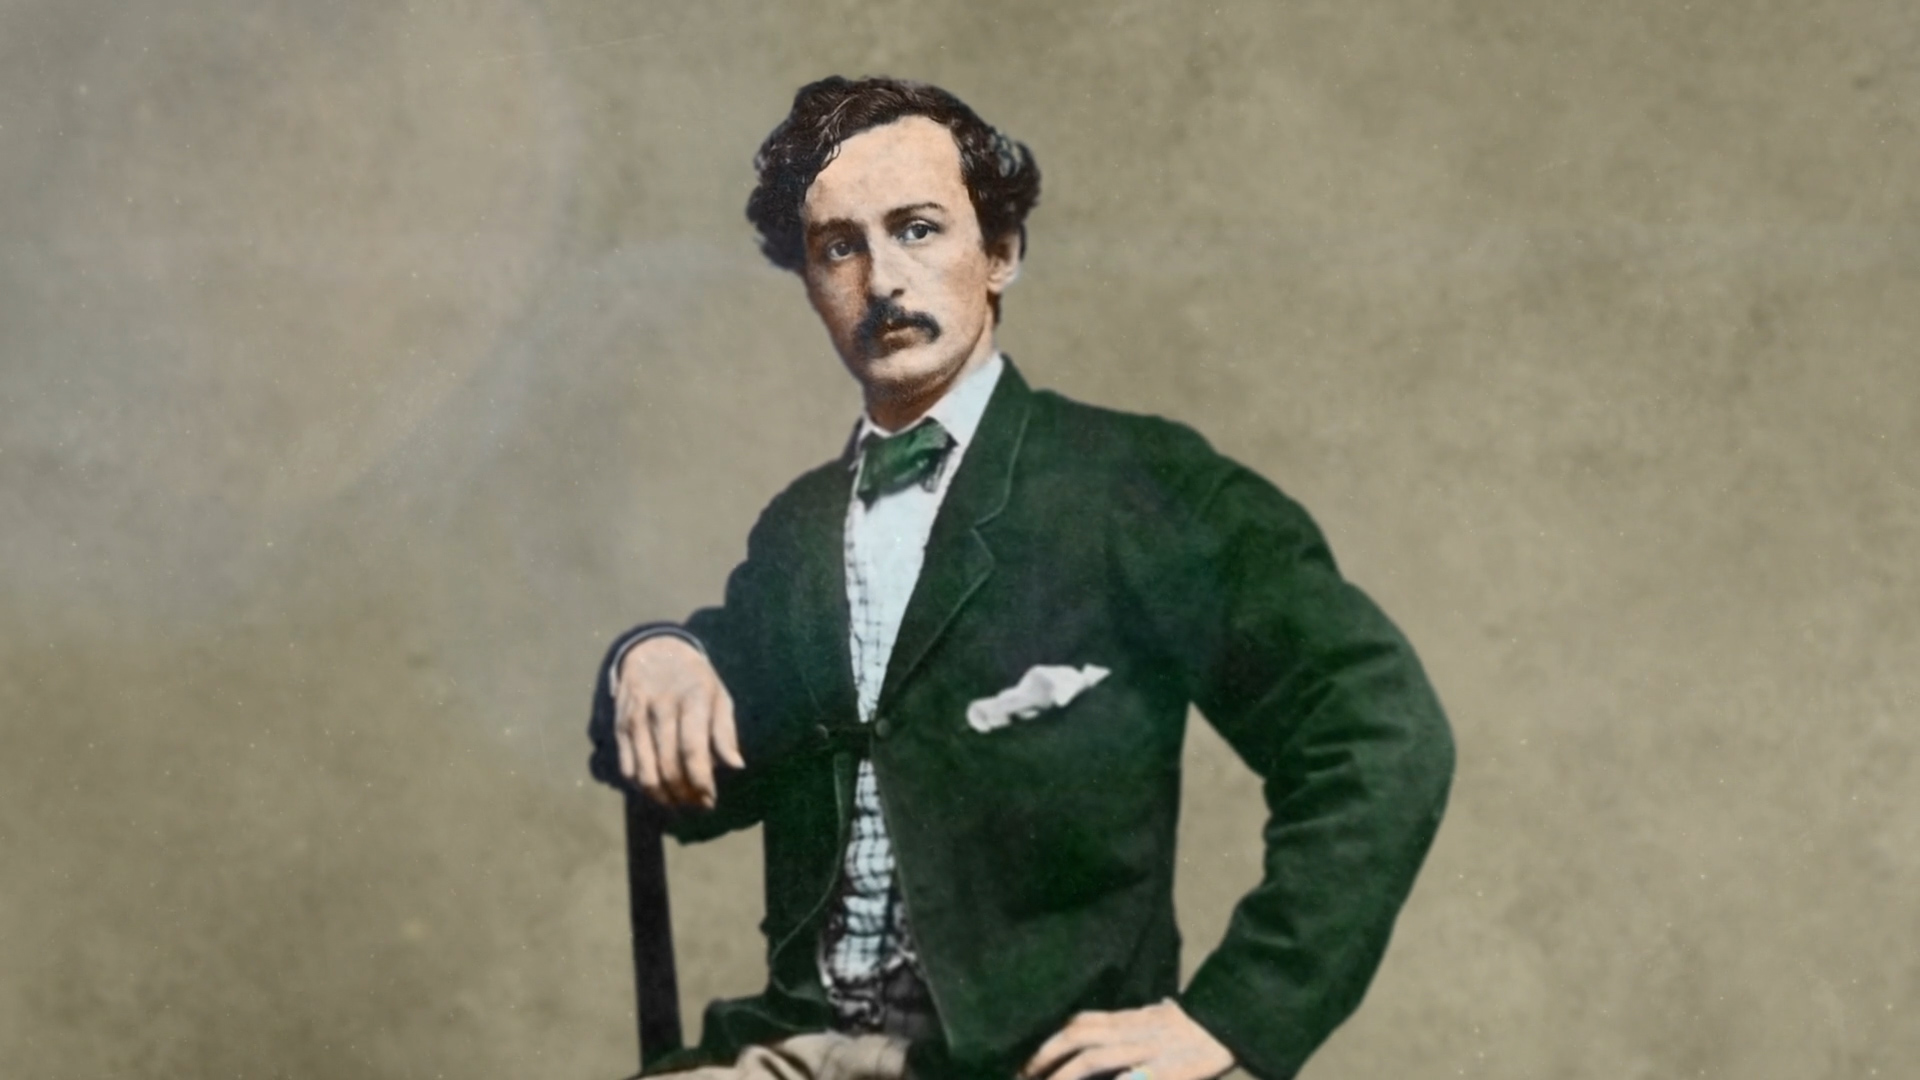 The Escape of John Wilkes Booth